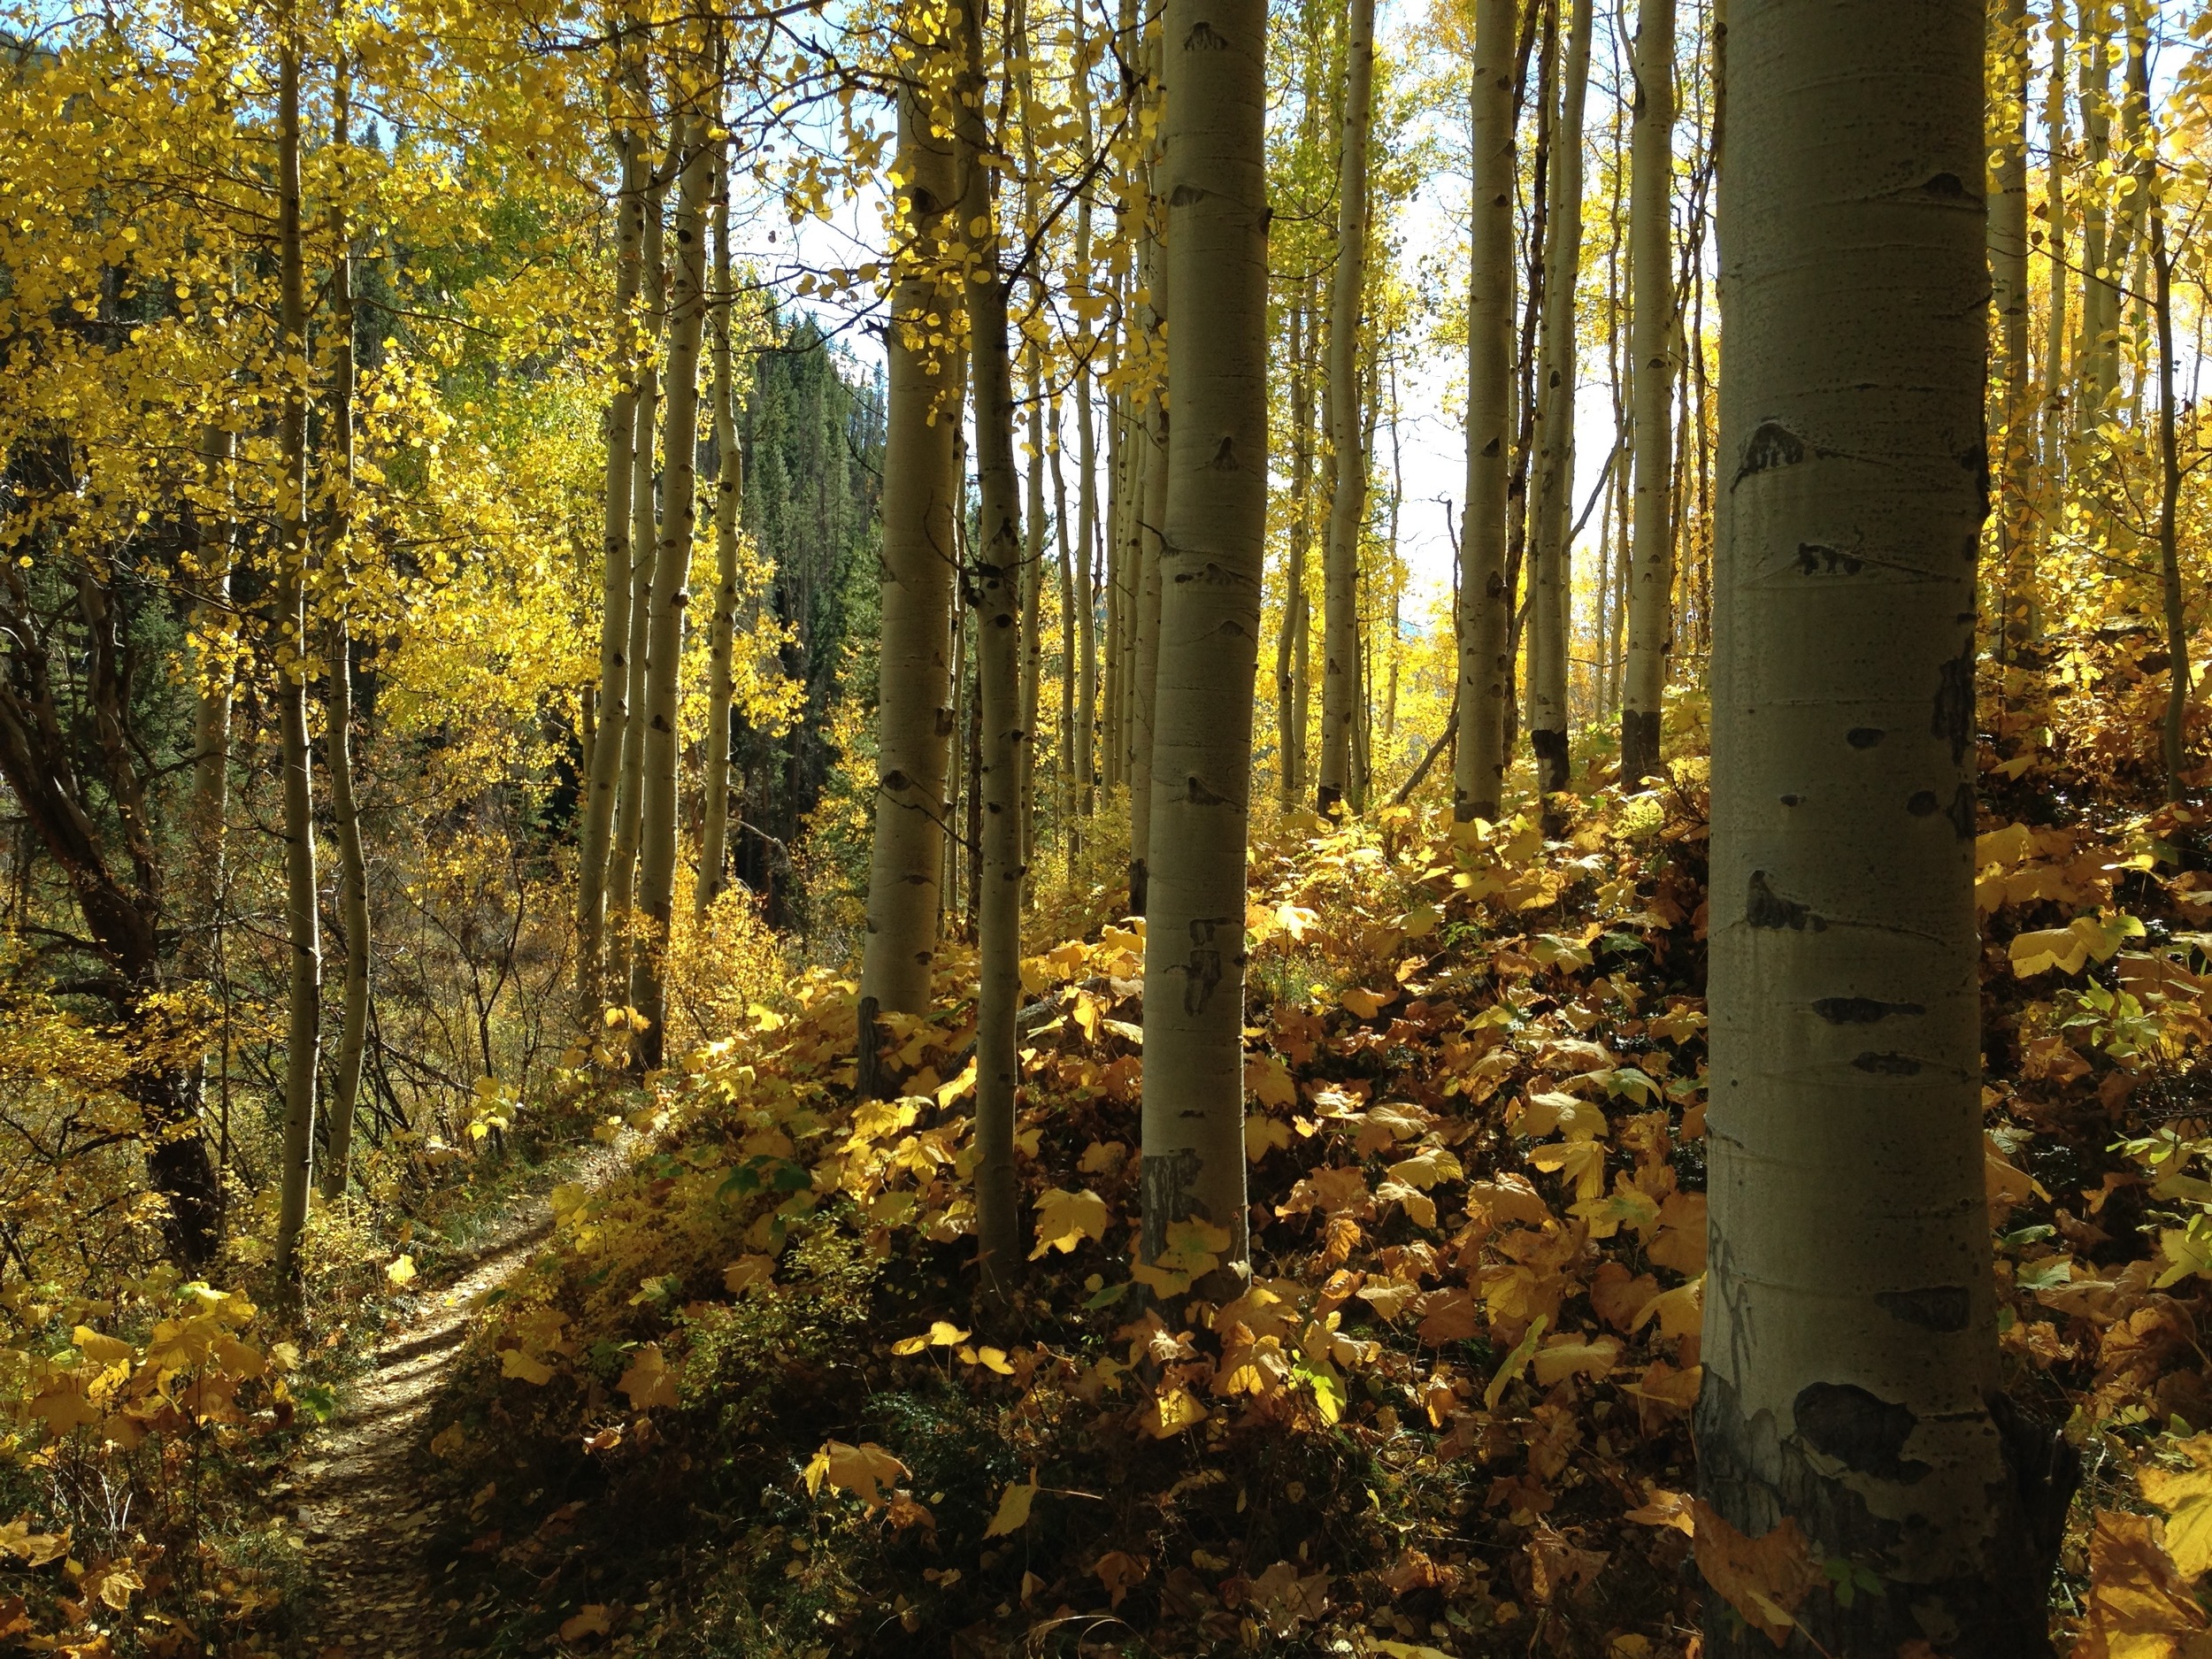  A magical gem of a forest along the Two Elks tail, Vail, CO 